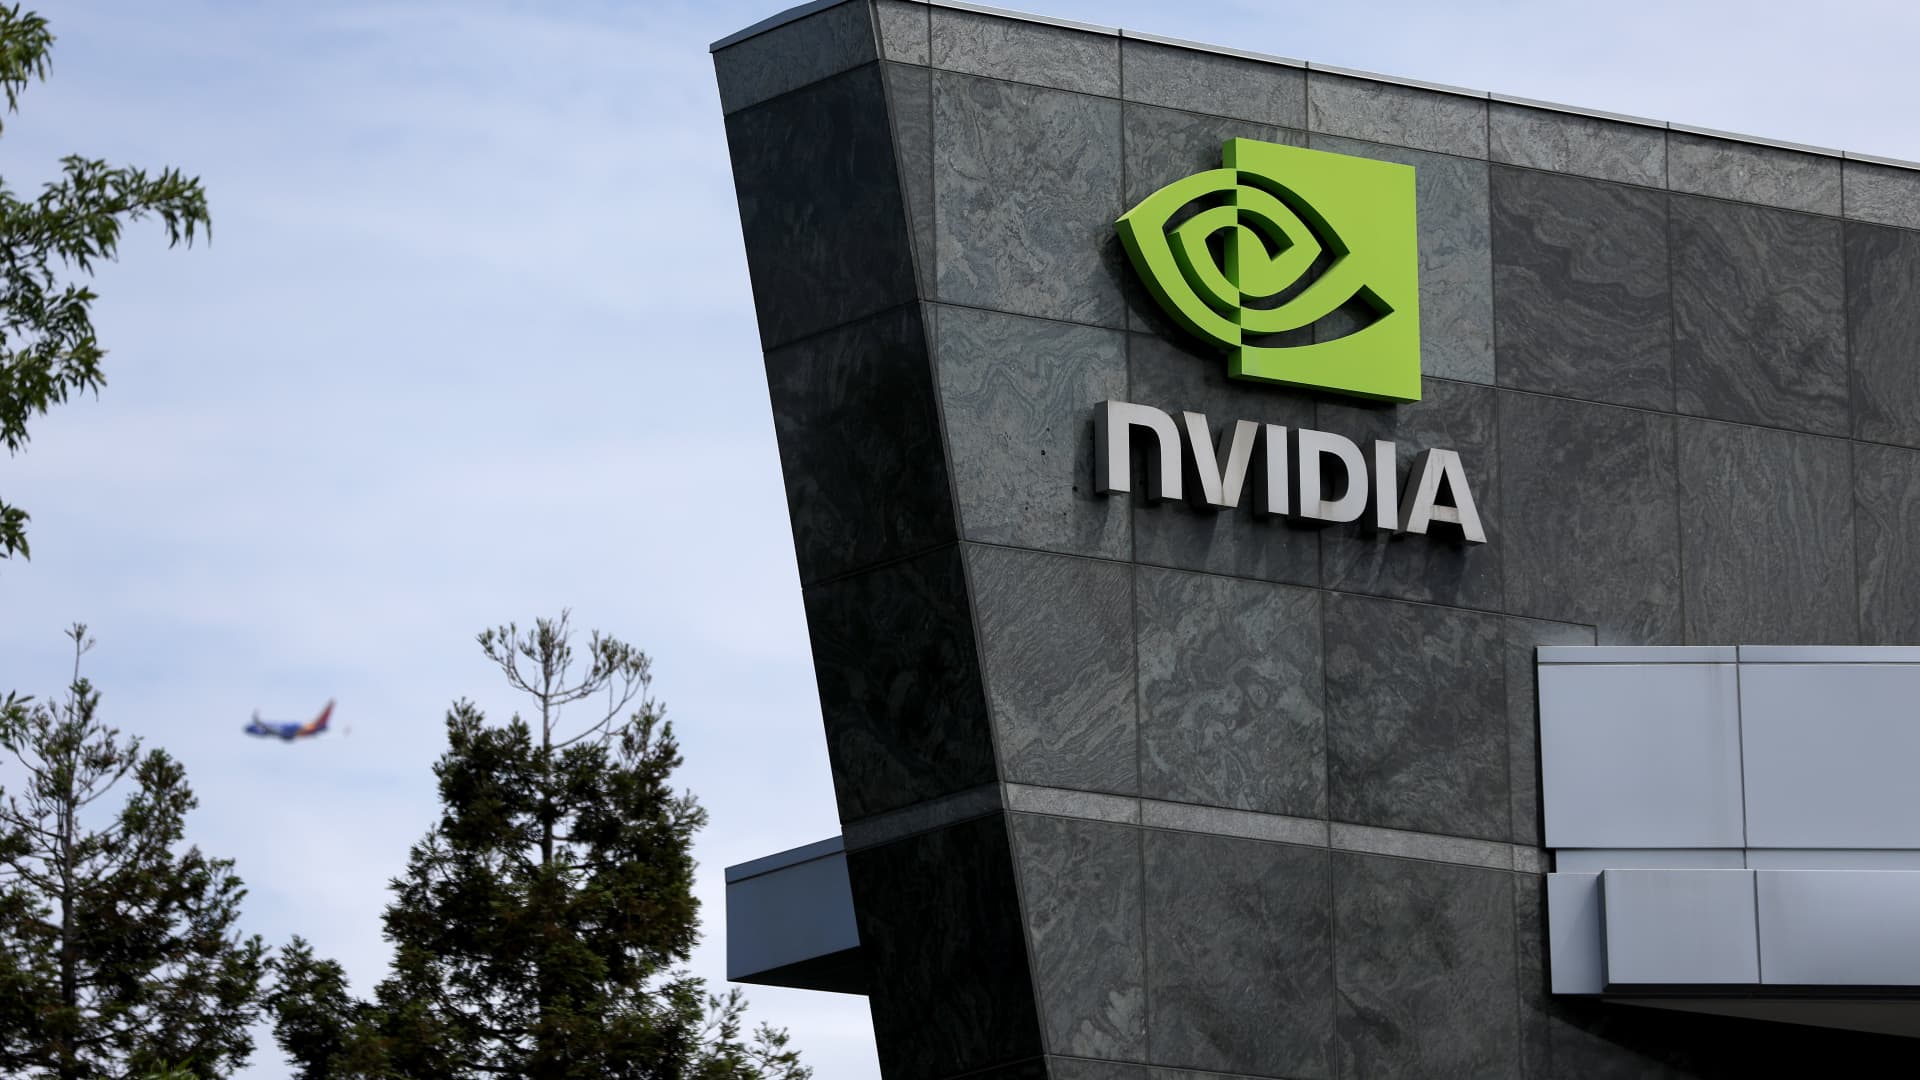 Nvidia earnings scare away AMD, Intel investors as legacy chipmakers lose ground in AI